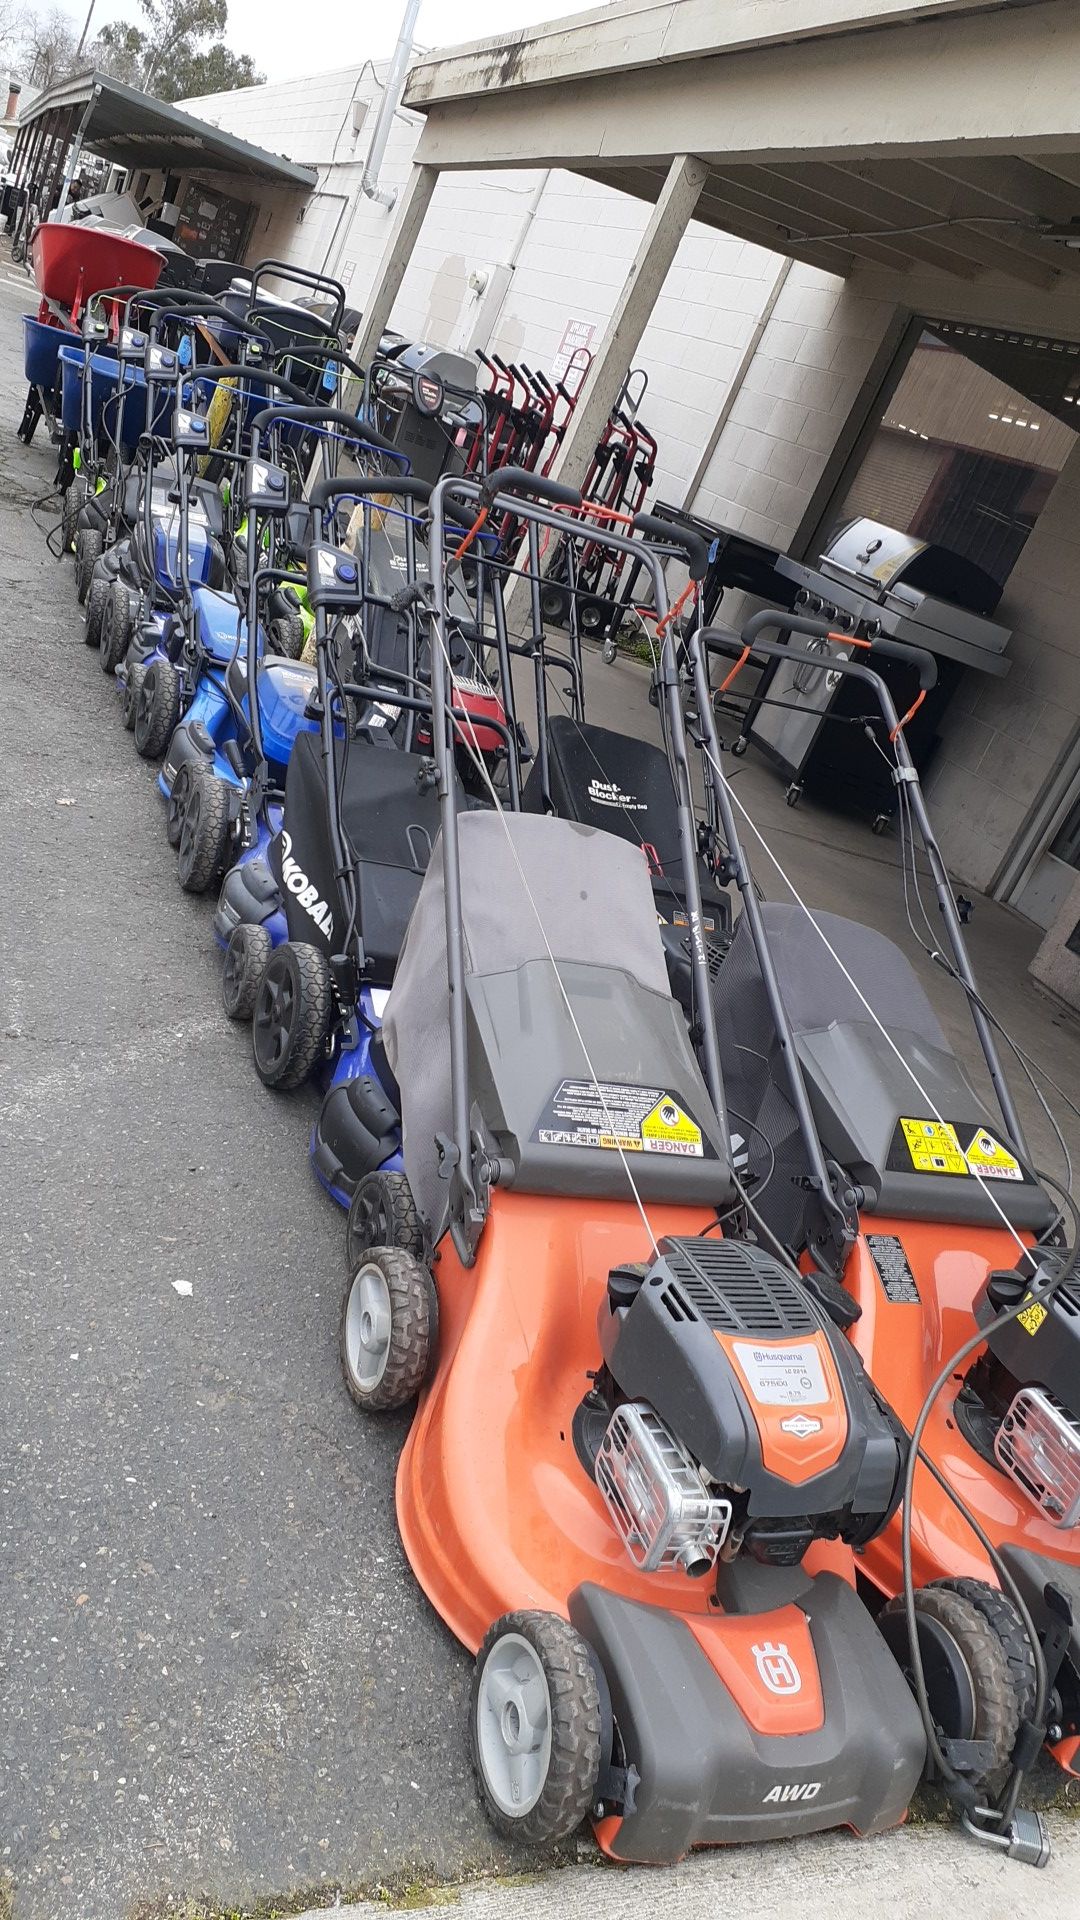 Gas and electric powered Lawn equipment